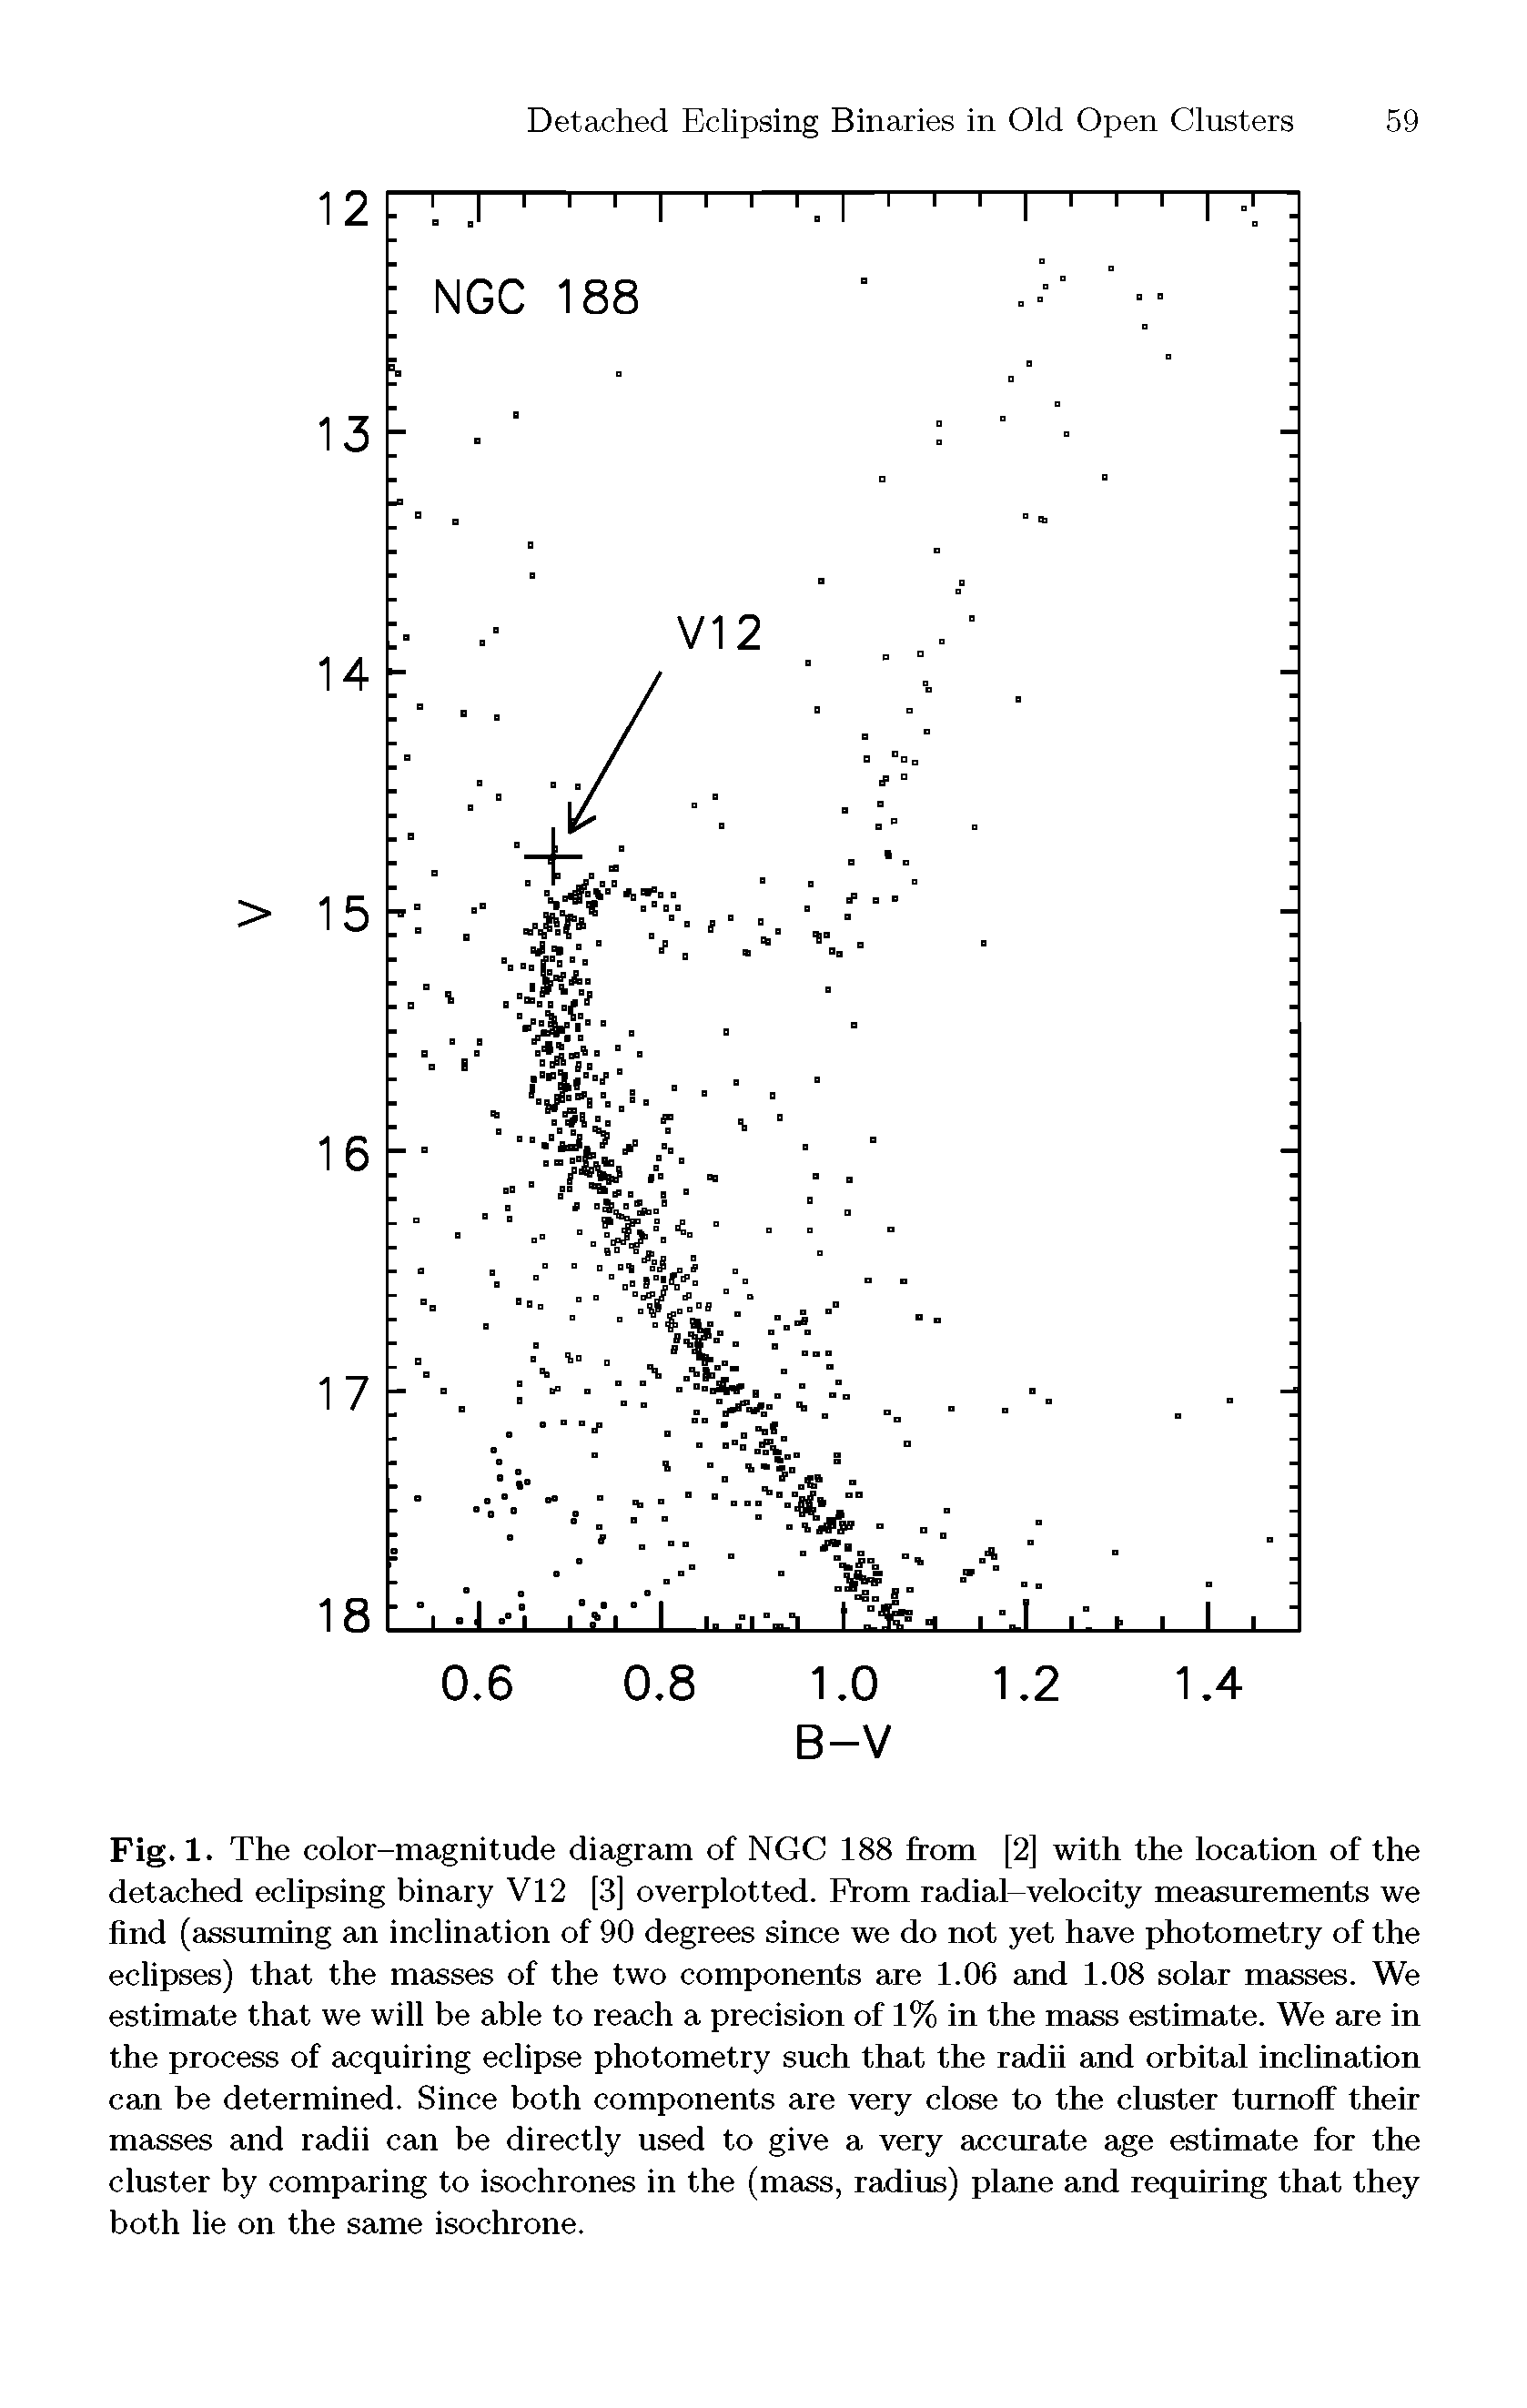 Fig. 1. The color-magnitude diagram of NGC 188 from [2] with the location of the detached eclipsing binary V12 [3] overplotted. From radial-velocity measurements we find (assuming an inclination of 90 degrees since we do not yet have photometry of the eclipses) that the masses of the two components are 1.06 and 1.08 solar masses. We estimate that we will be able to reach a precision of 1% in the mass estimate. We are in the process of acquiring eclipse photometry such that the radii and orbital inclination can be determined. Since both components are very close to the cluster turnoff their masses and radii can be directly used to give a very accurate age estimate for the cluster by comparing to isochrones in the (mass, radius) plane and requiring that they both lie on the same isochrone.